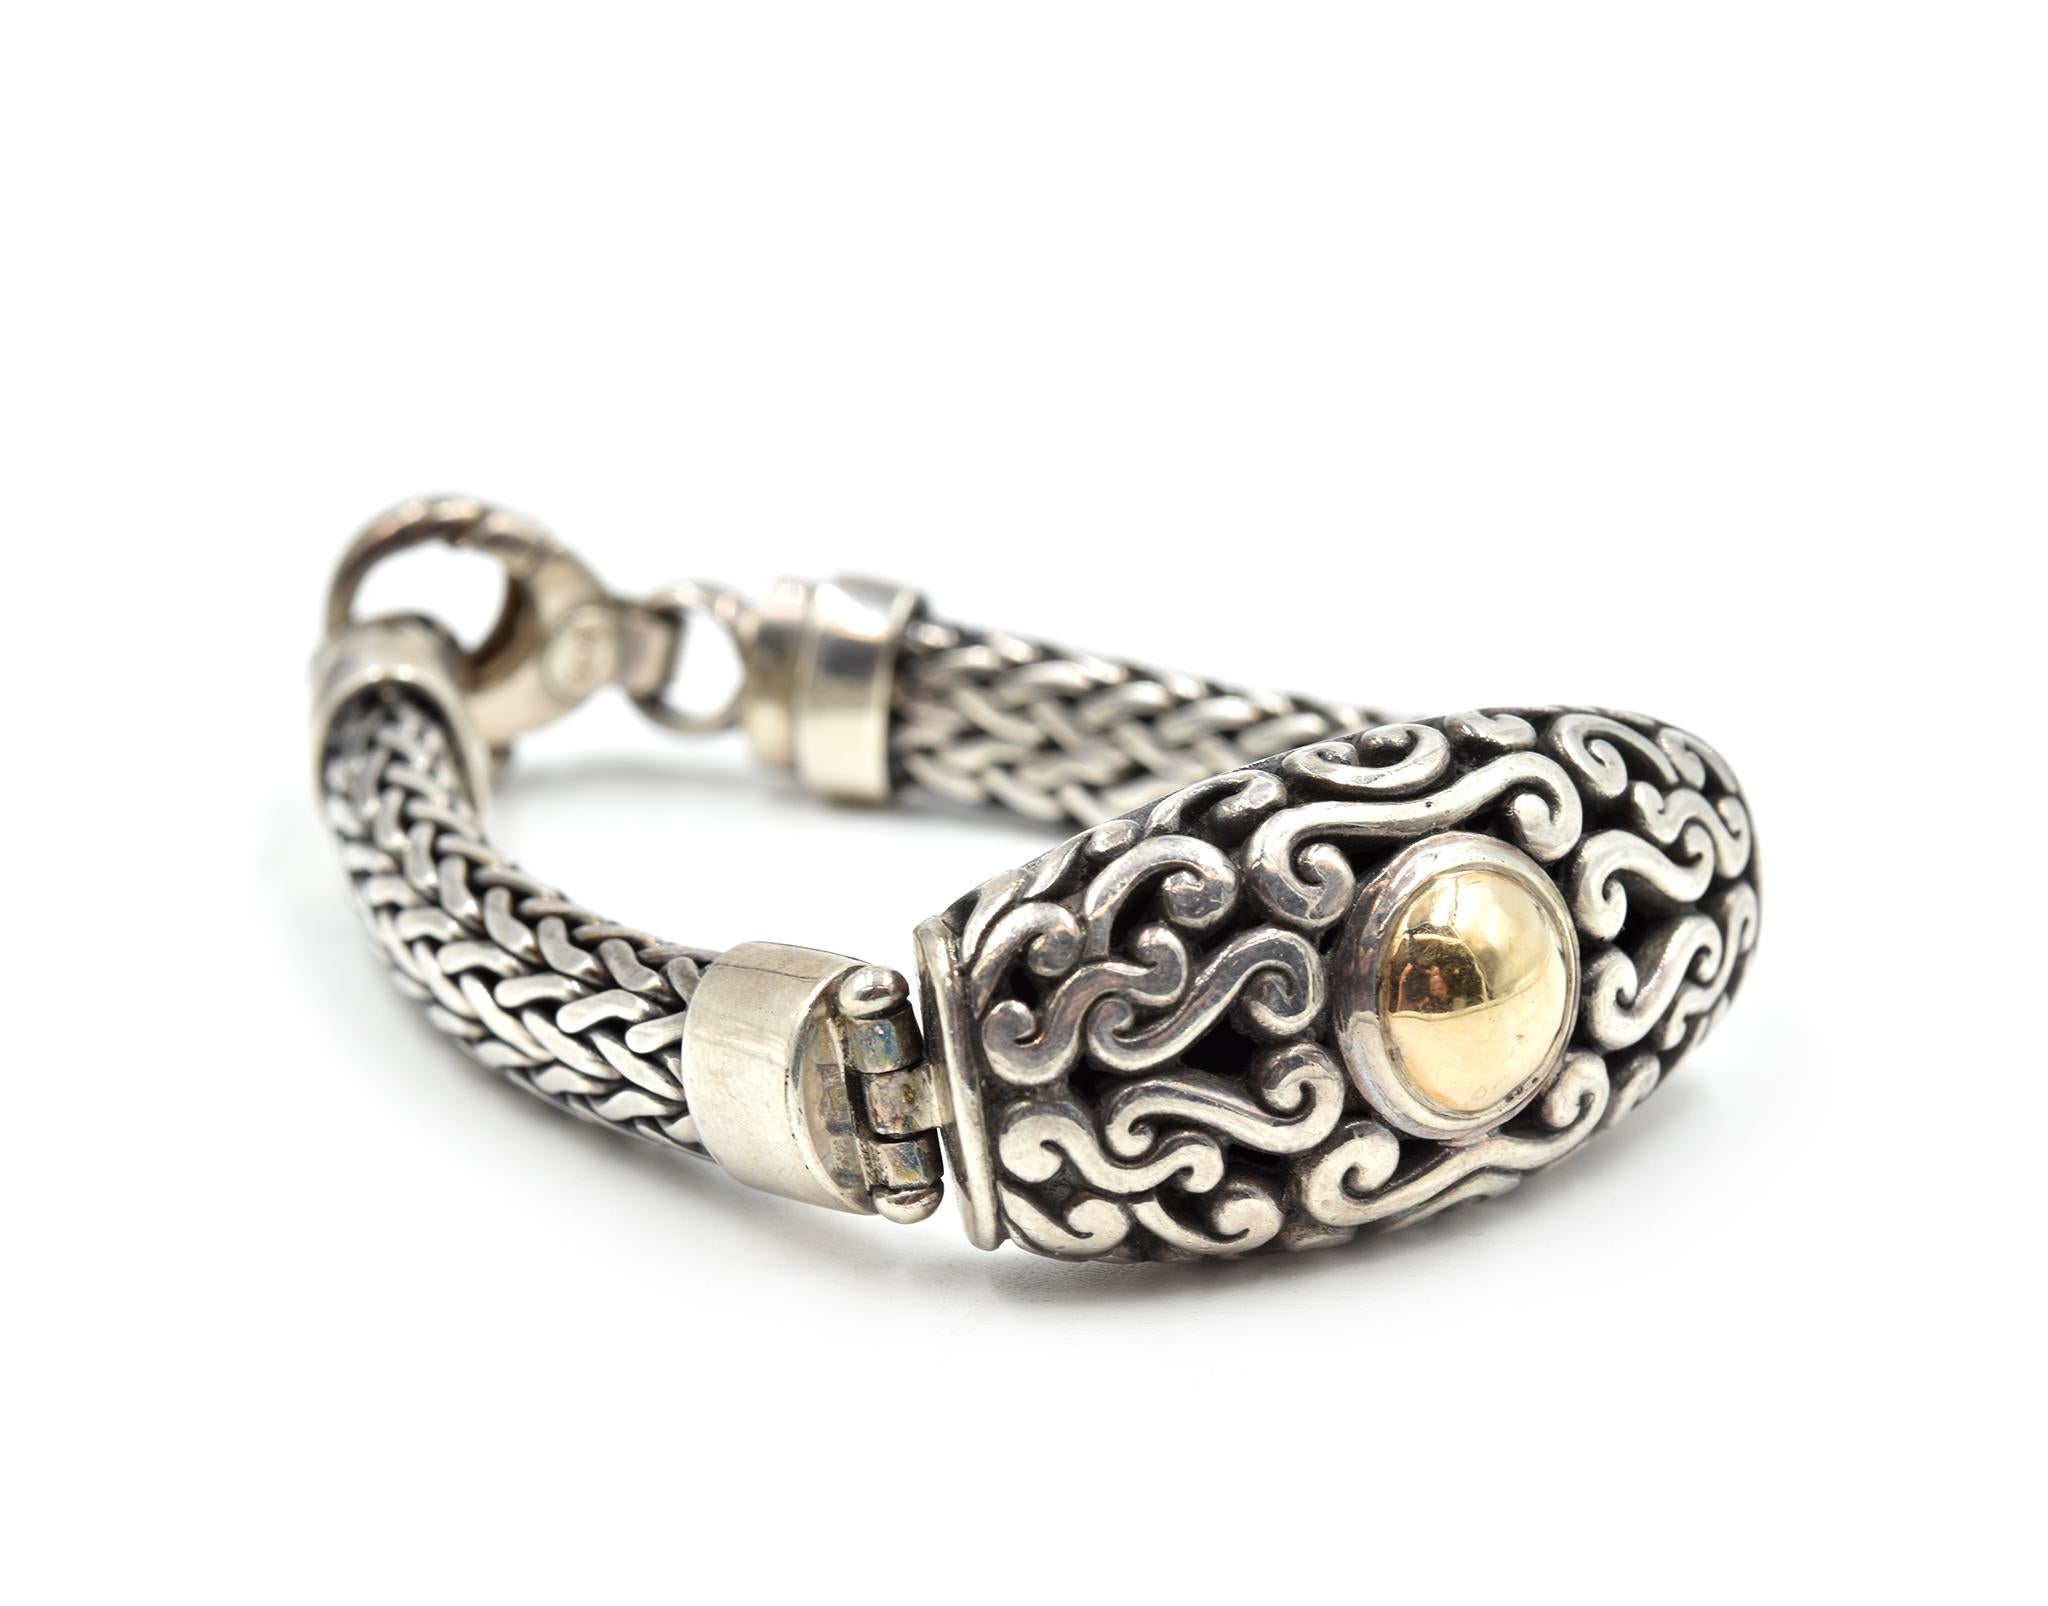 Designer: custom design
Material: sterling silver
Dimensions: the bracelet measures 7 1/2-inches long and 3/4-inch wide
Weight: 65.04 grams
